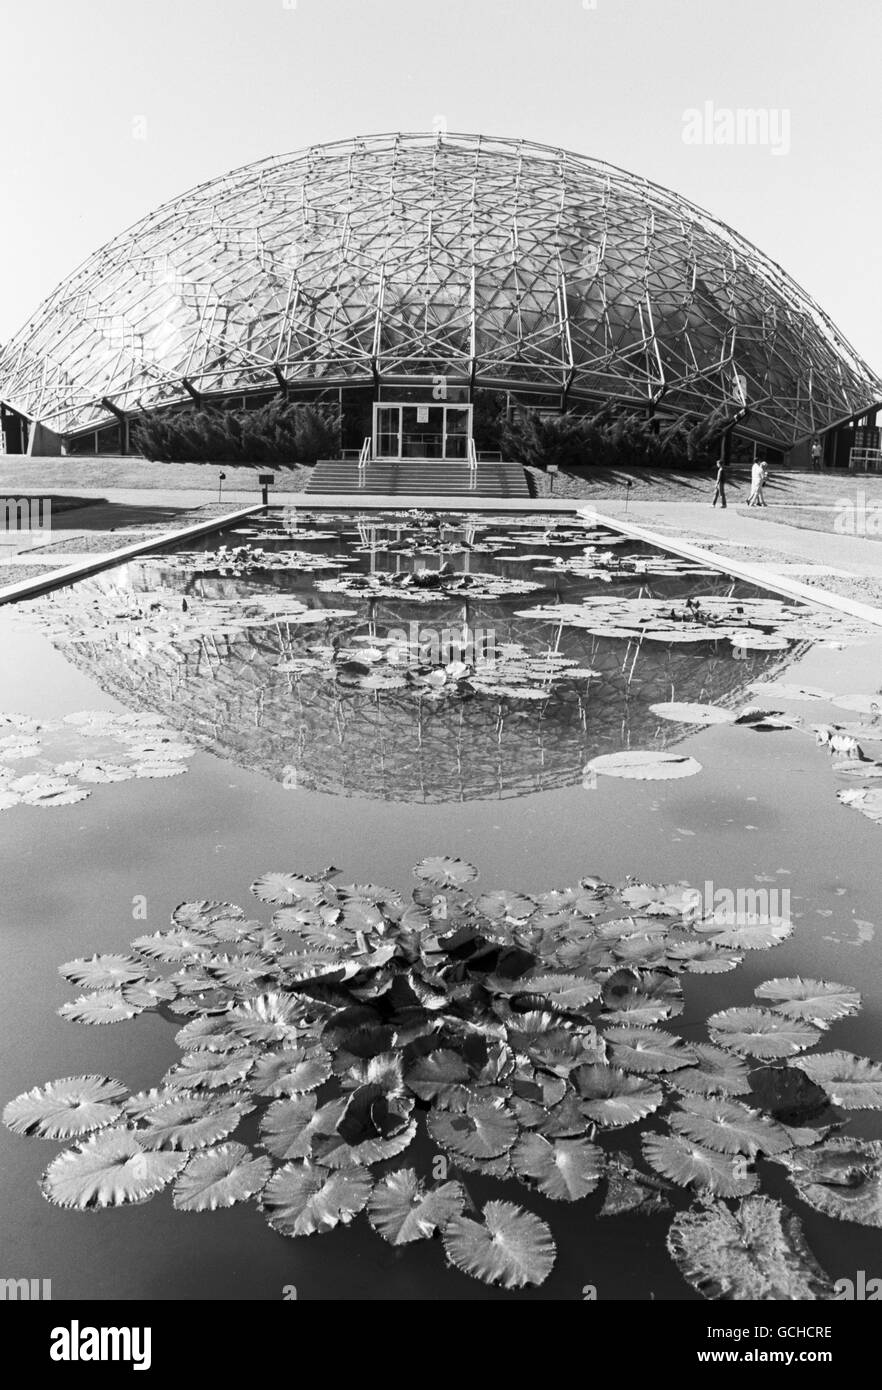 The Climatron greenhouse, Missouri Botanical Garden in St. Louis, shown here in 1964. Stock Photo